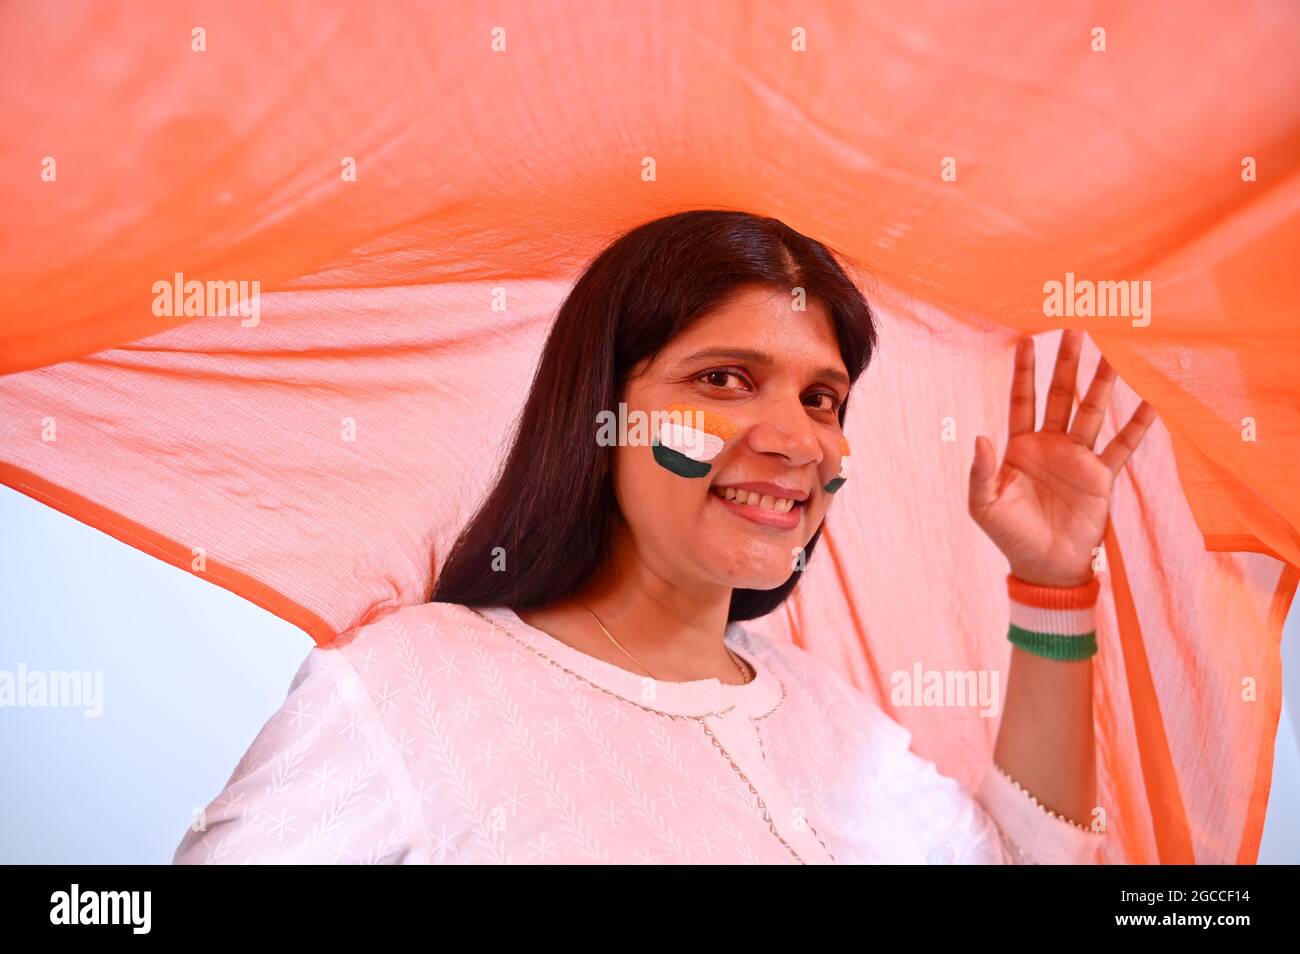 Young indian girl celebrating Independence Day of India. Stock Photo